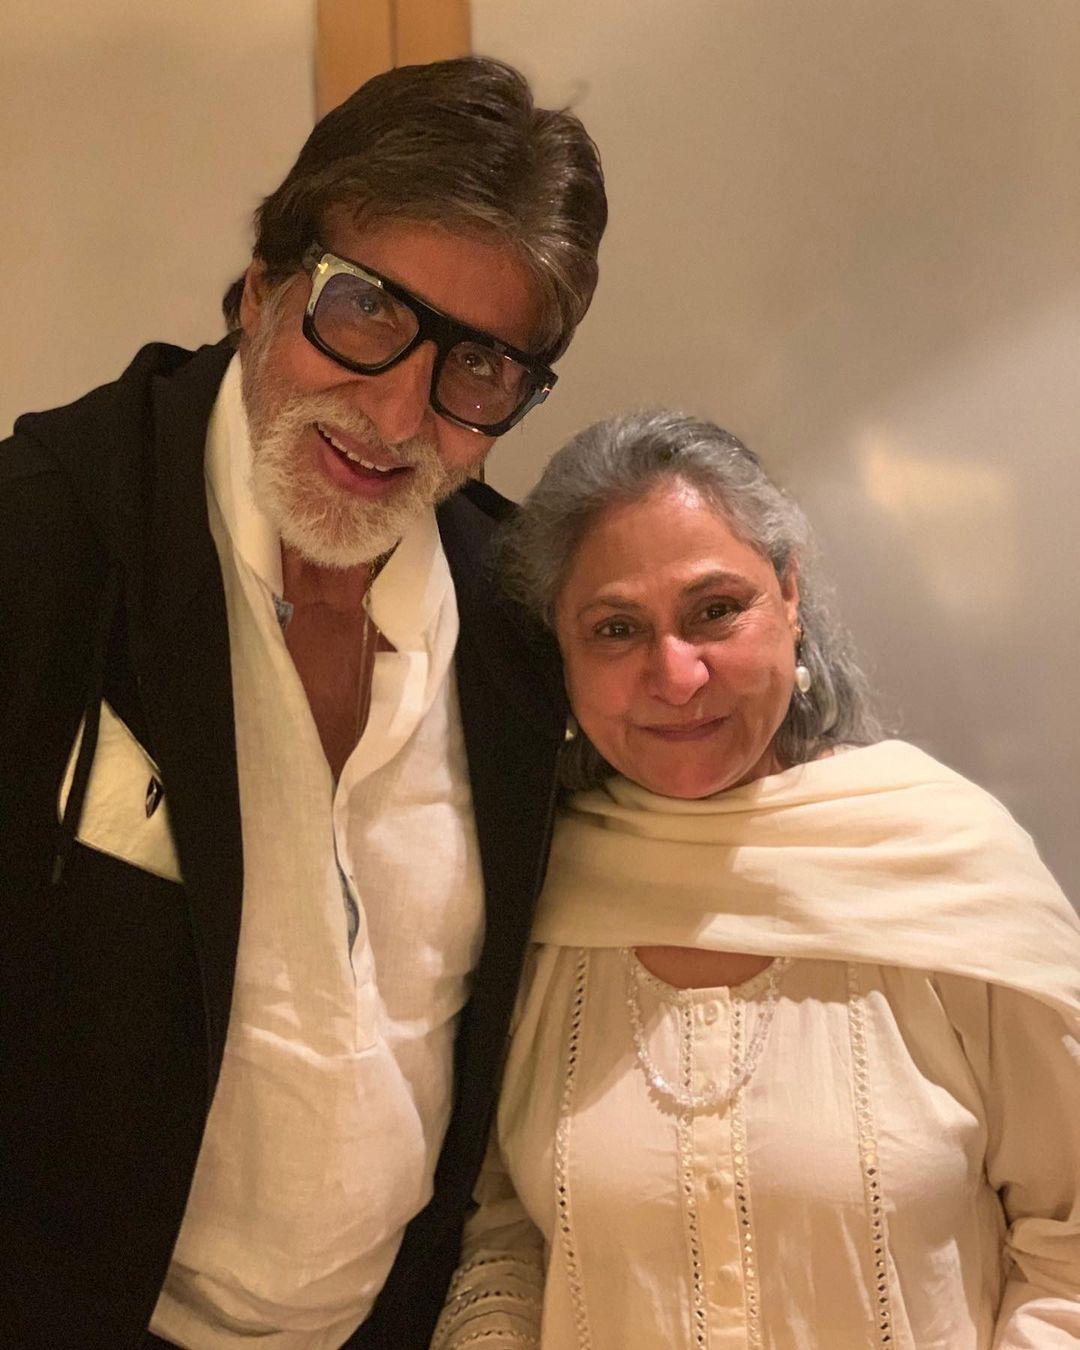 The Bachchan family has woven a legacy that transcends generations, leaving an unforgettable mark on the industry's history.